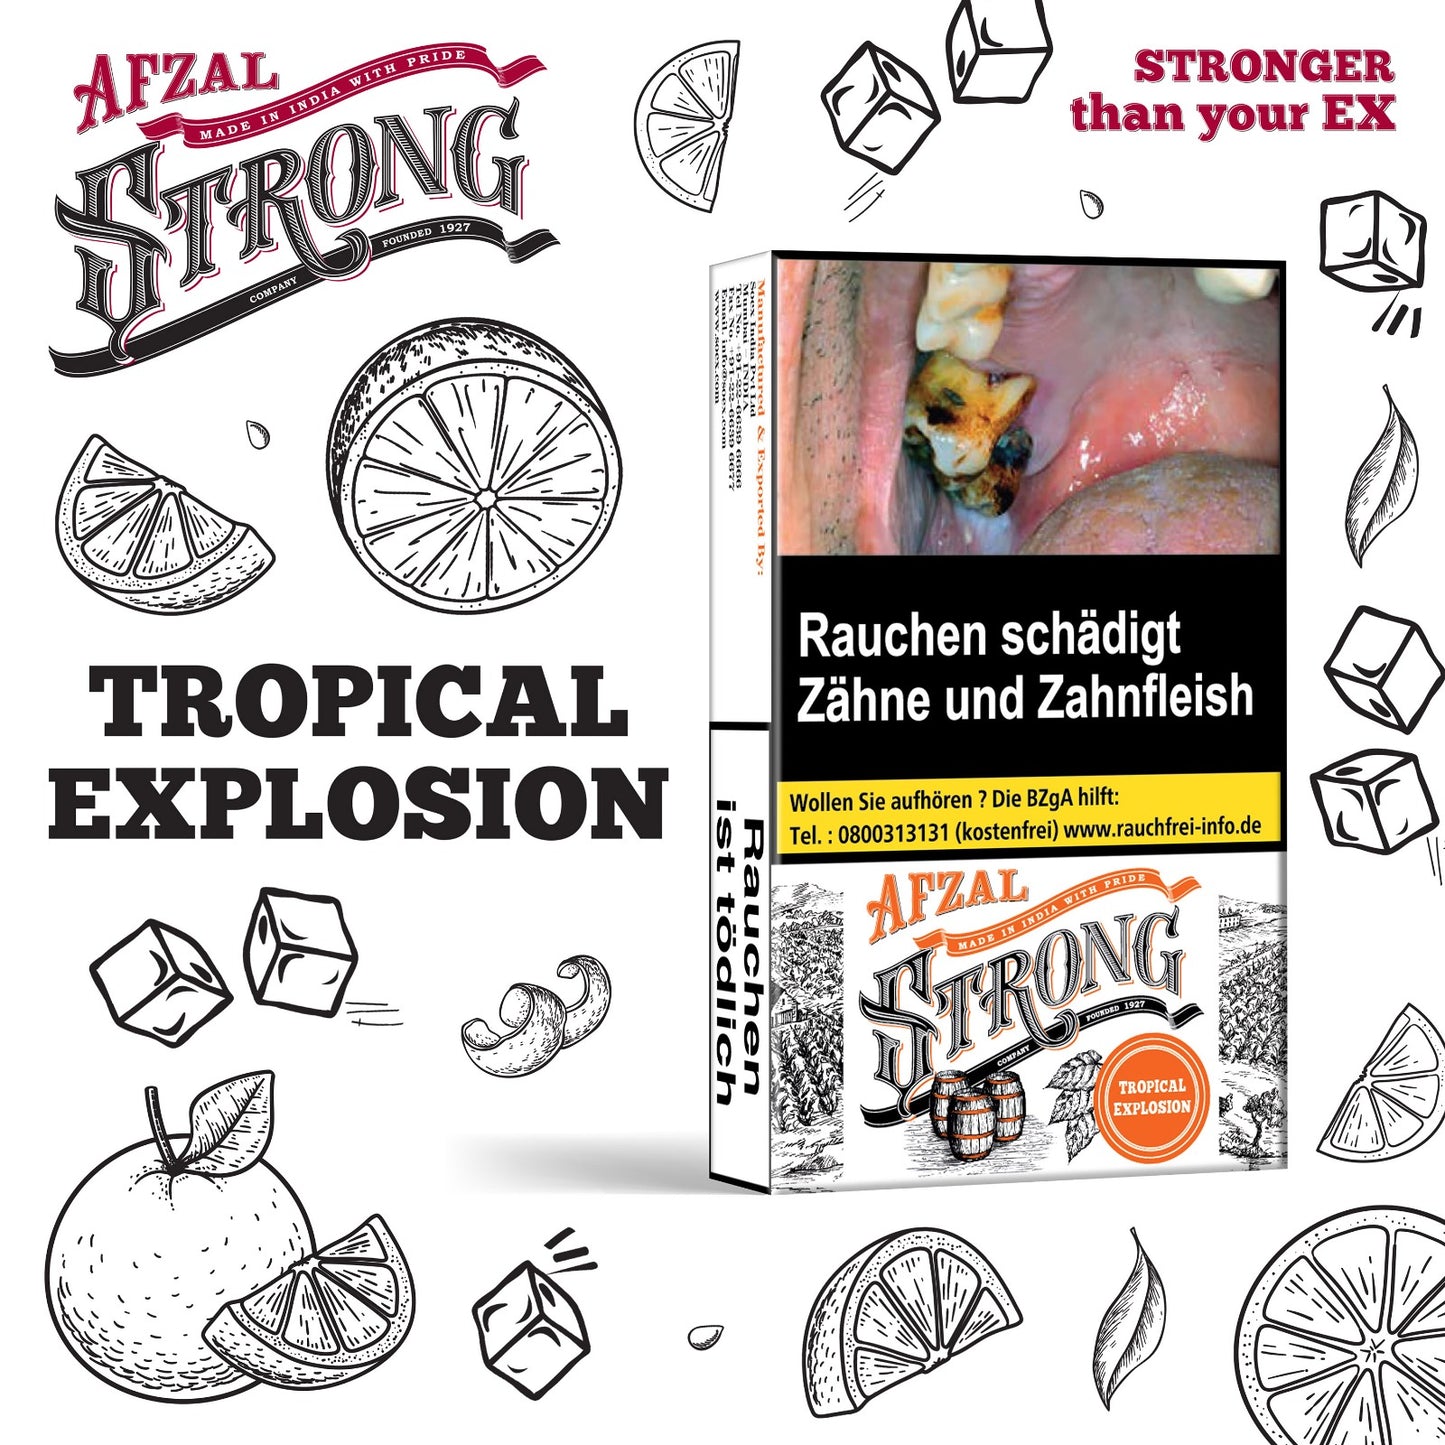 AFZAL STRONG "TROPICAL EXPLOSION" - 20g